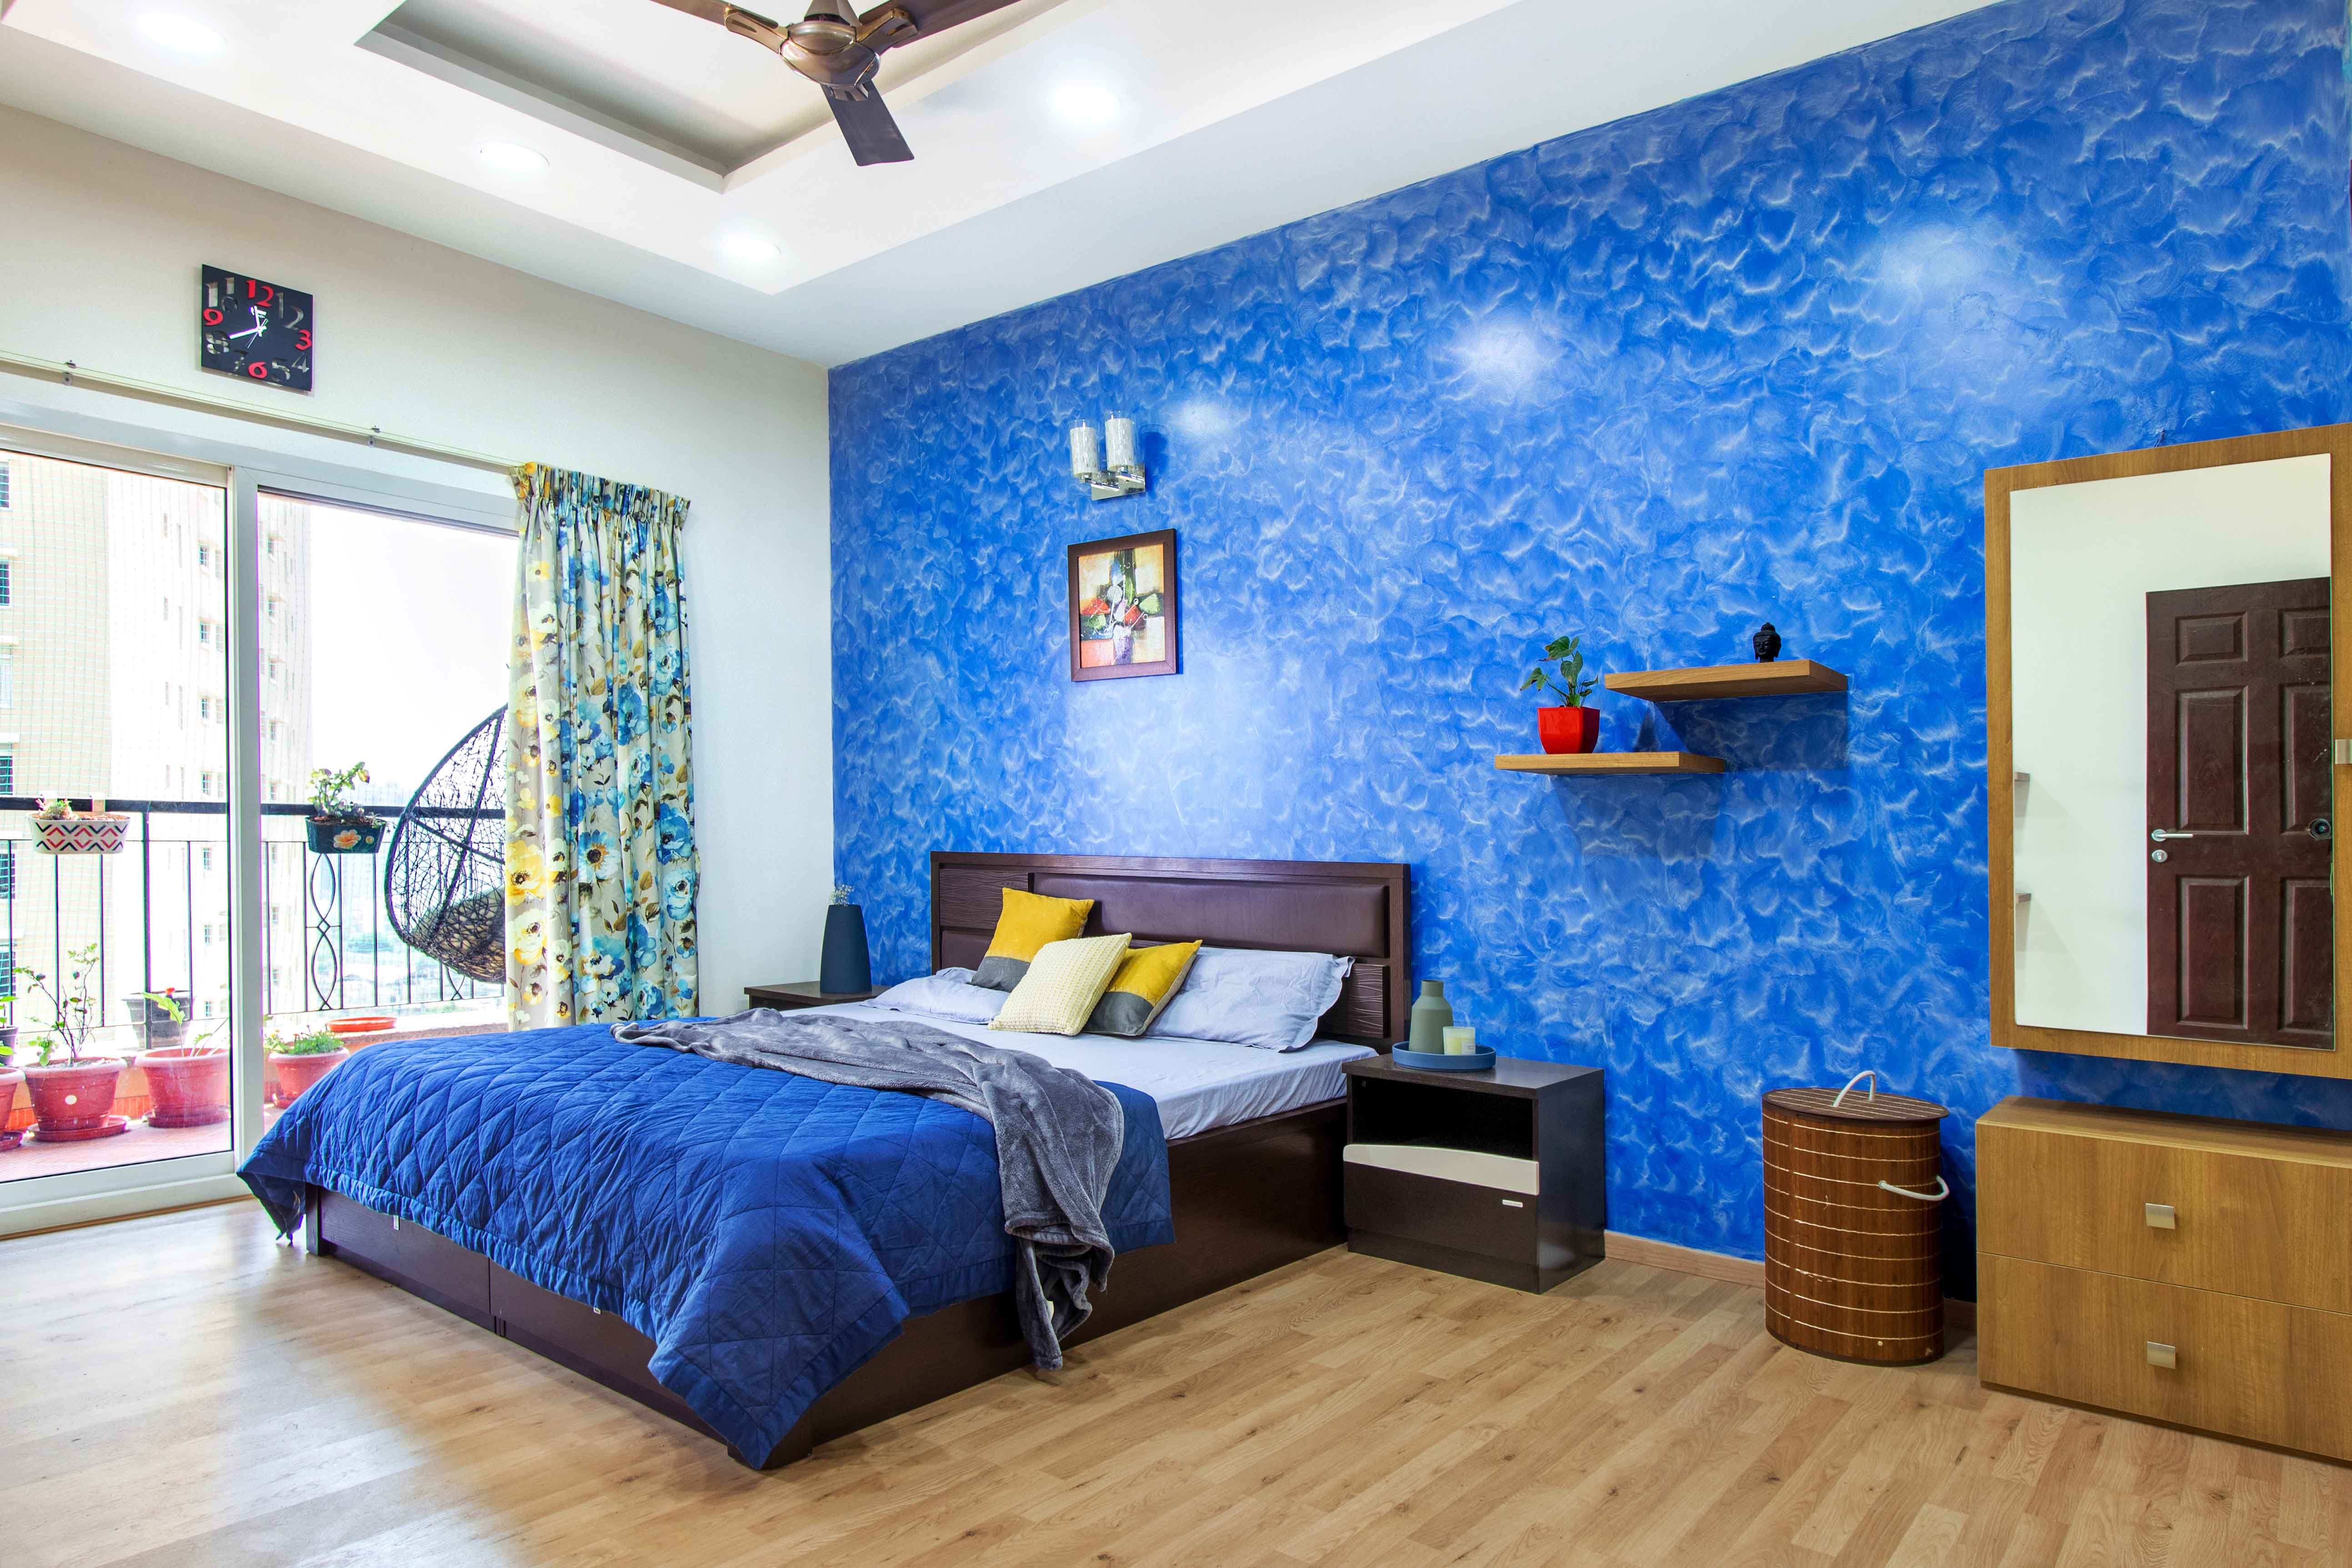 Classic Master Bedroom Design With Textured Bright Blue Accent Wall